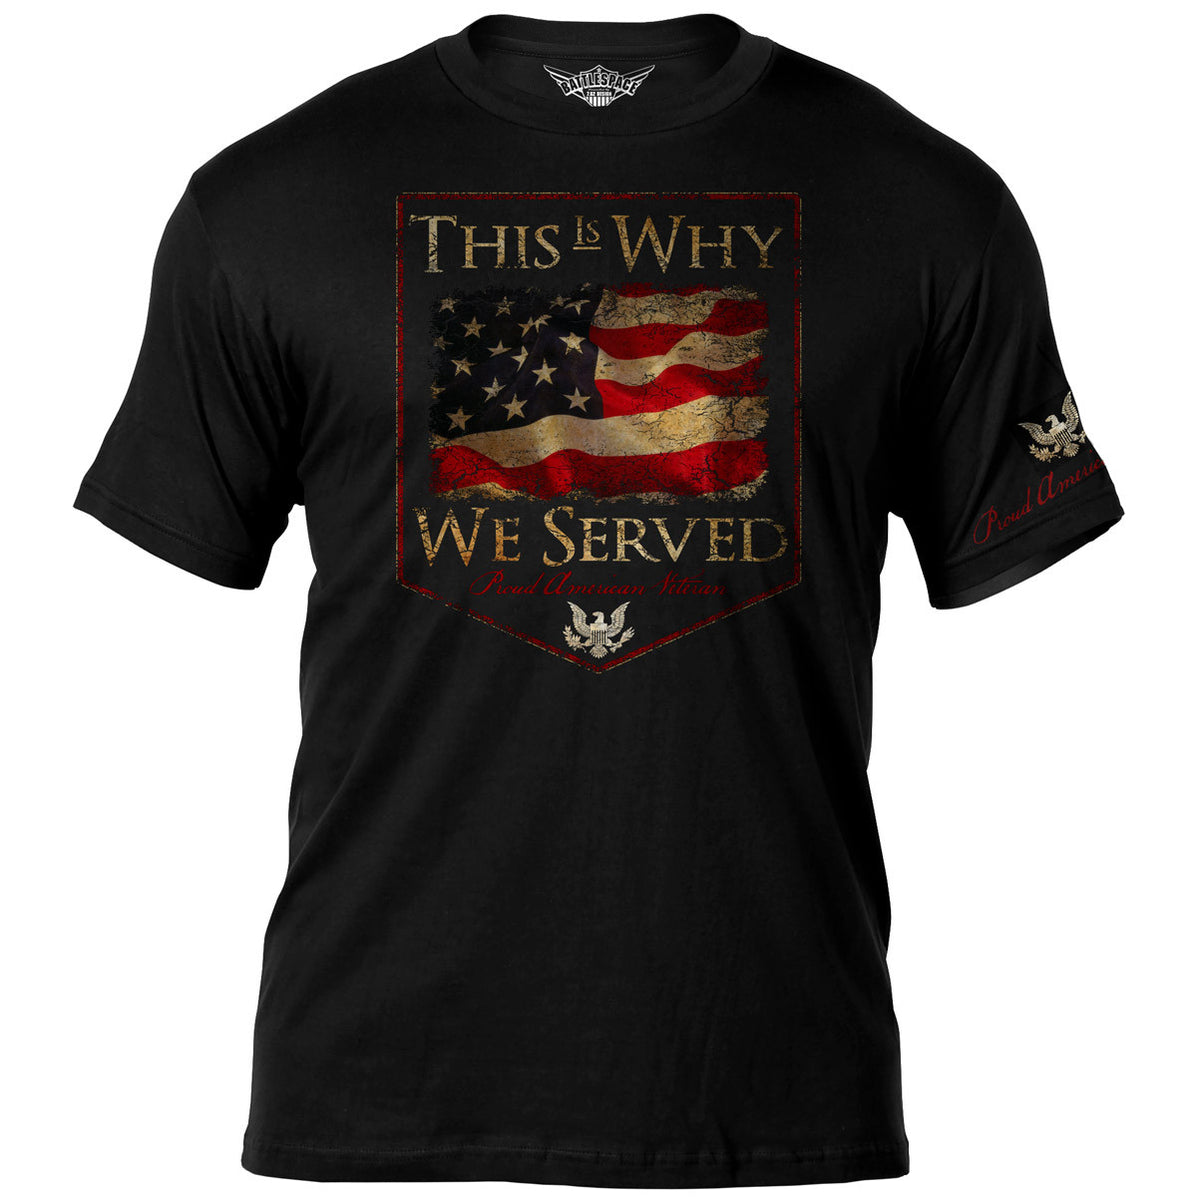 Veterans 'This Is Why We Served' 7.62 Design Battlespace Men's T-Shirt